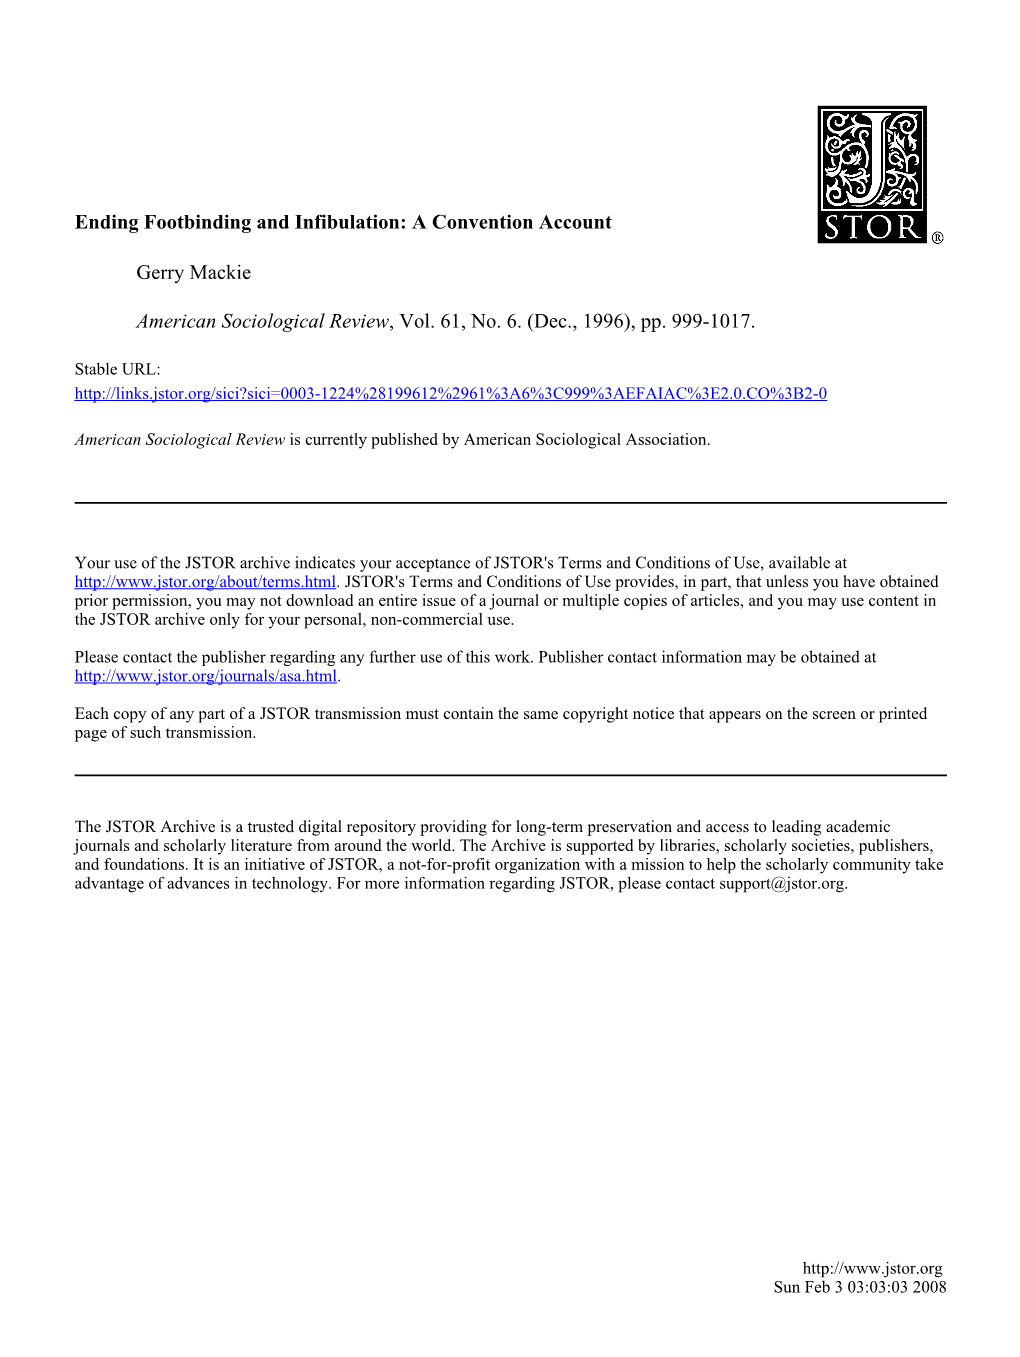 Ending Footbinding and Infibulation: a Convention Account Gerry Mackie American Sociological Review, Vol